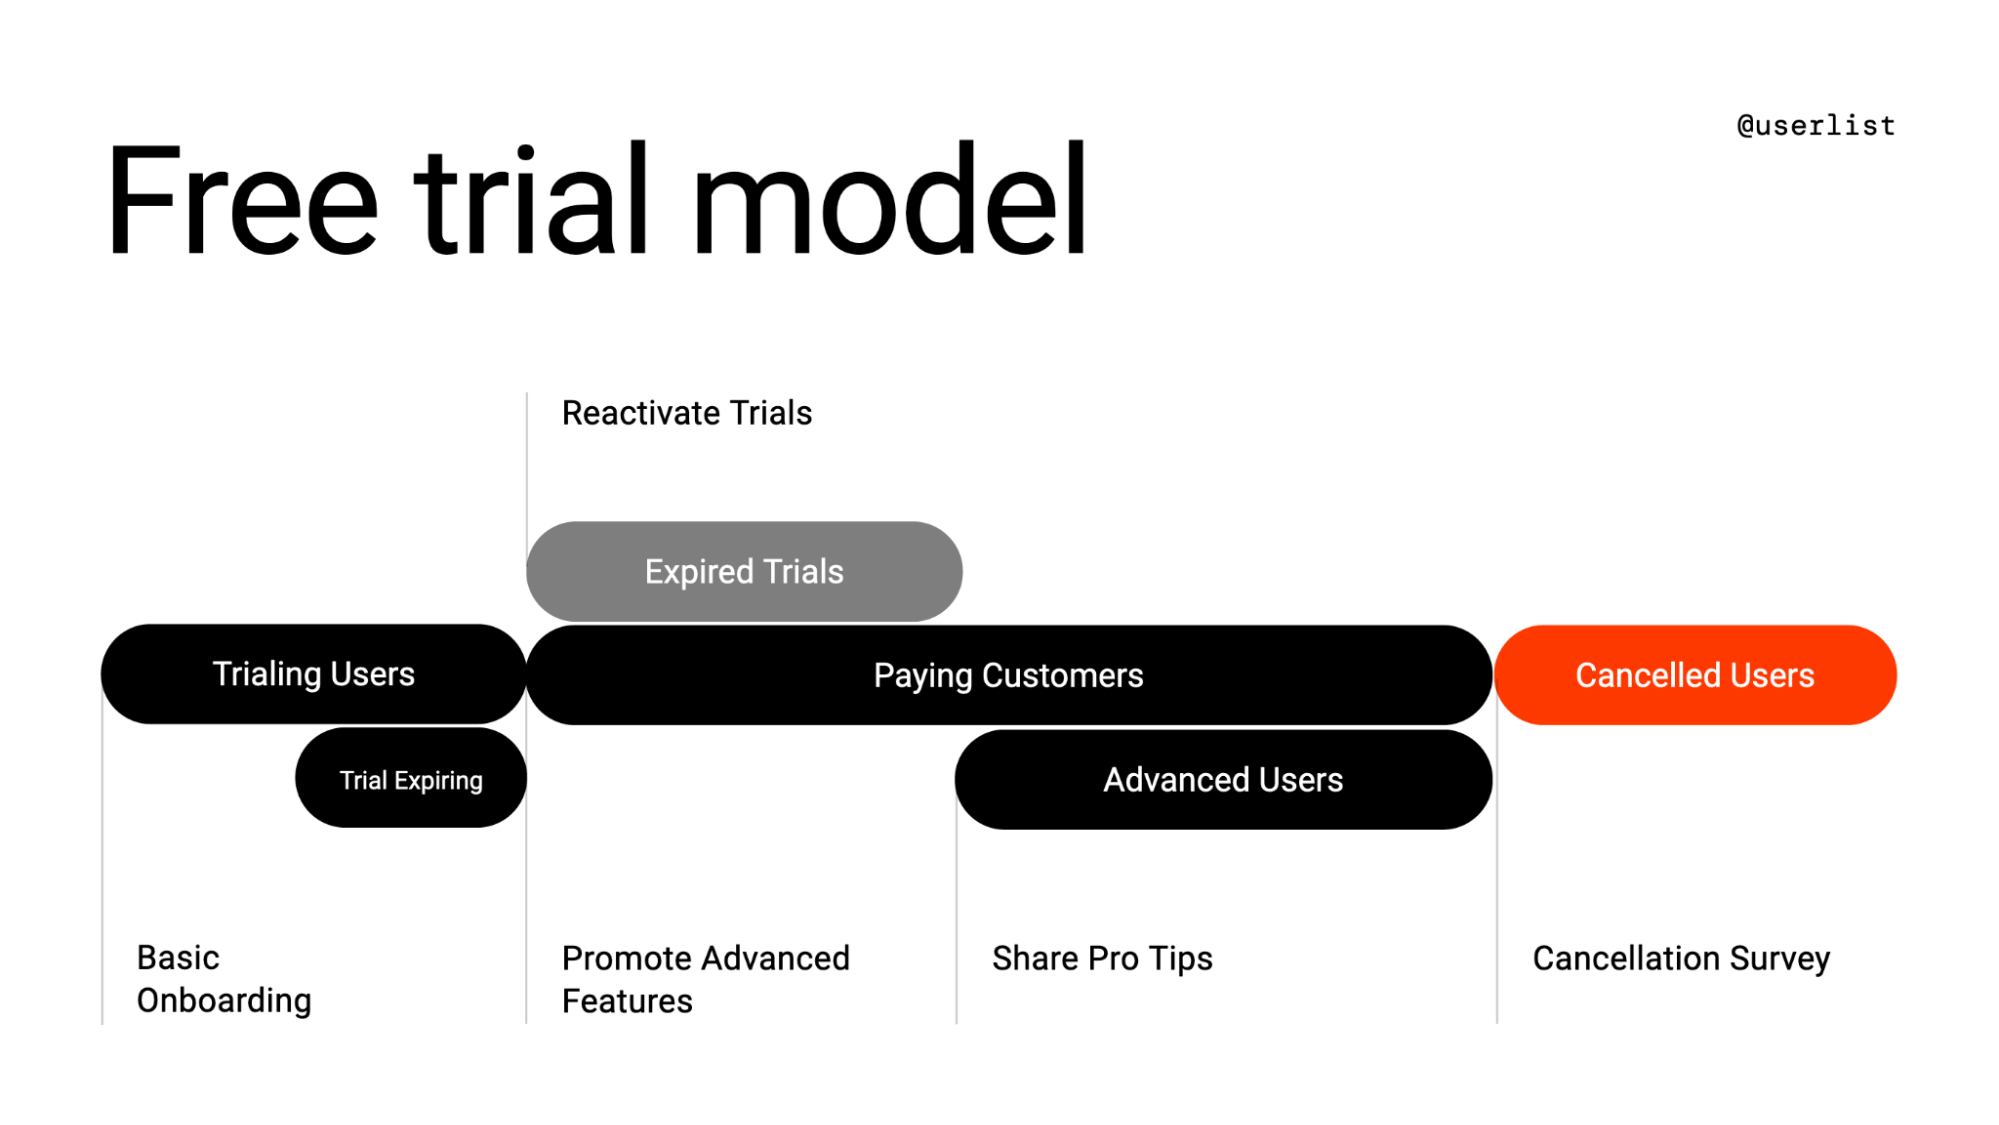 Self-Service SaaS User Onboarding: A segments map showing the free trial model